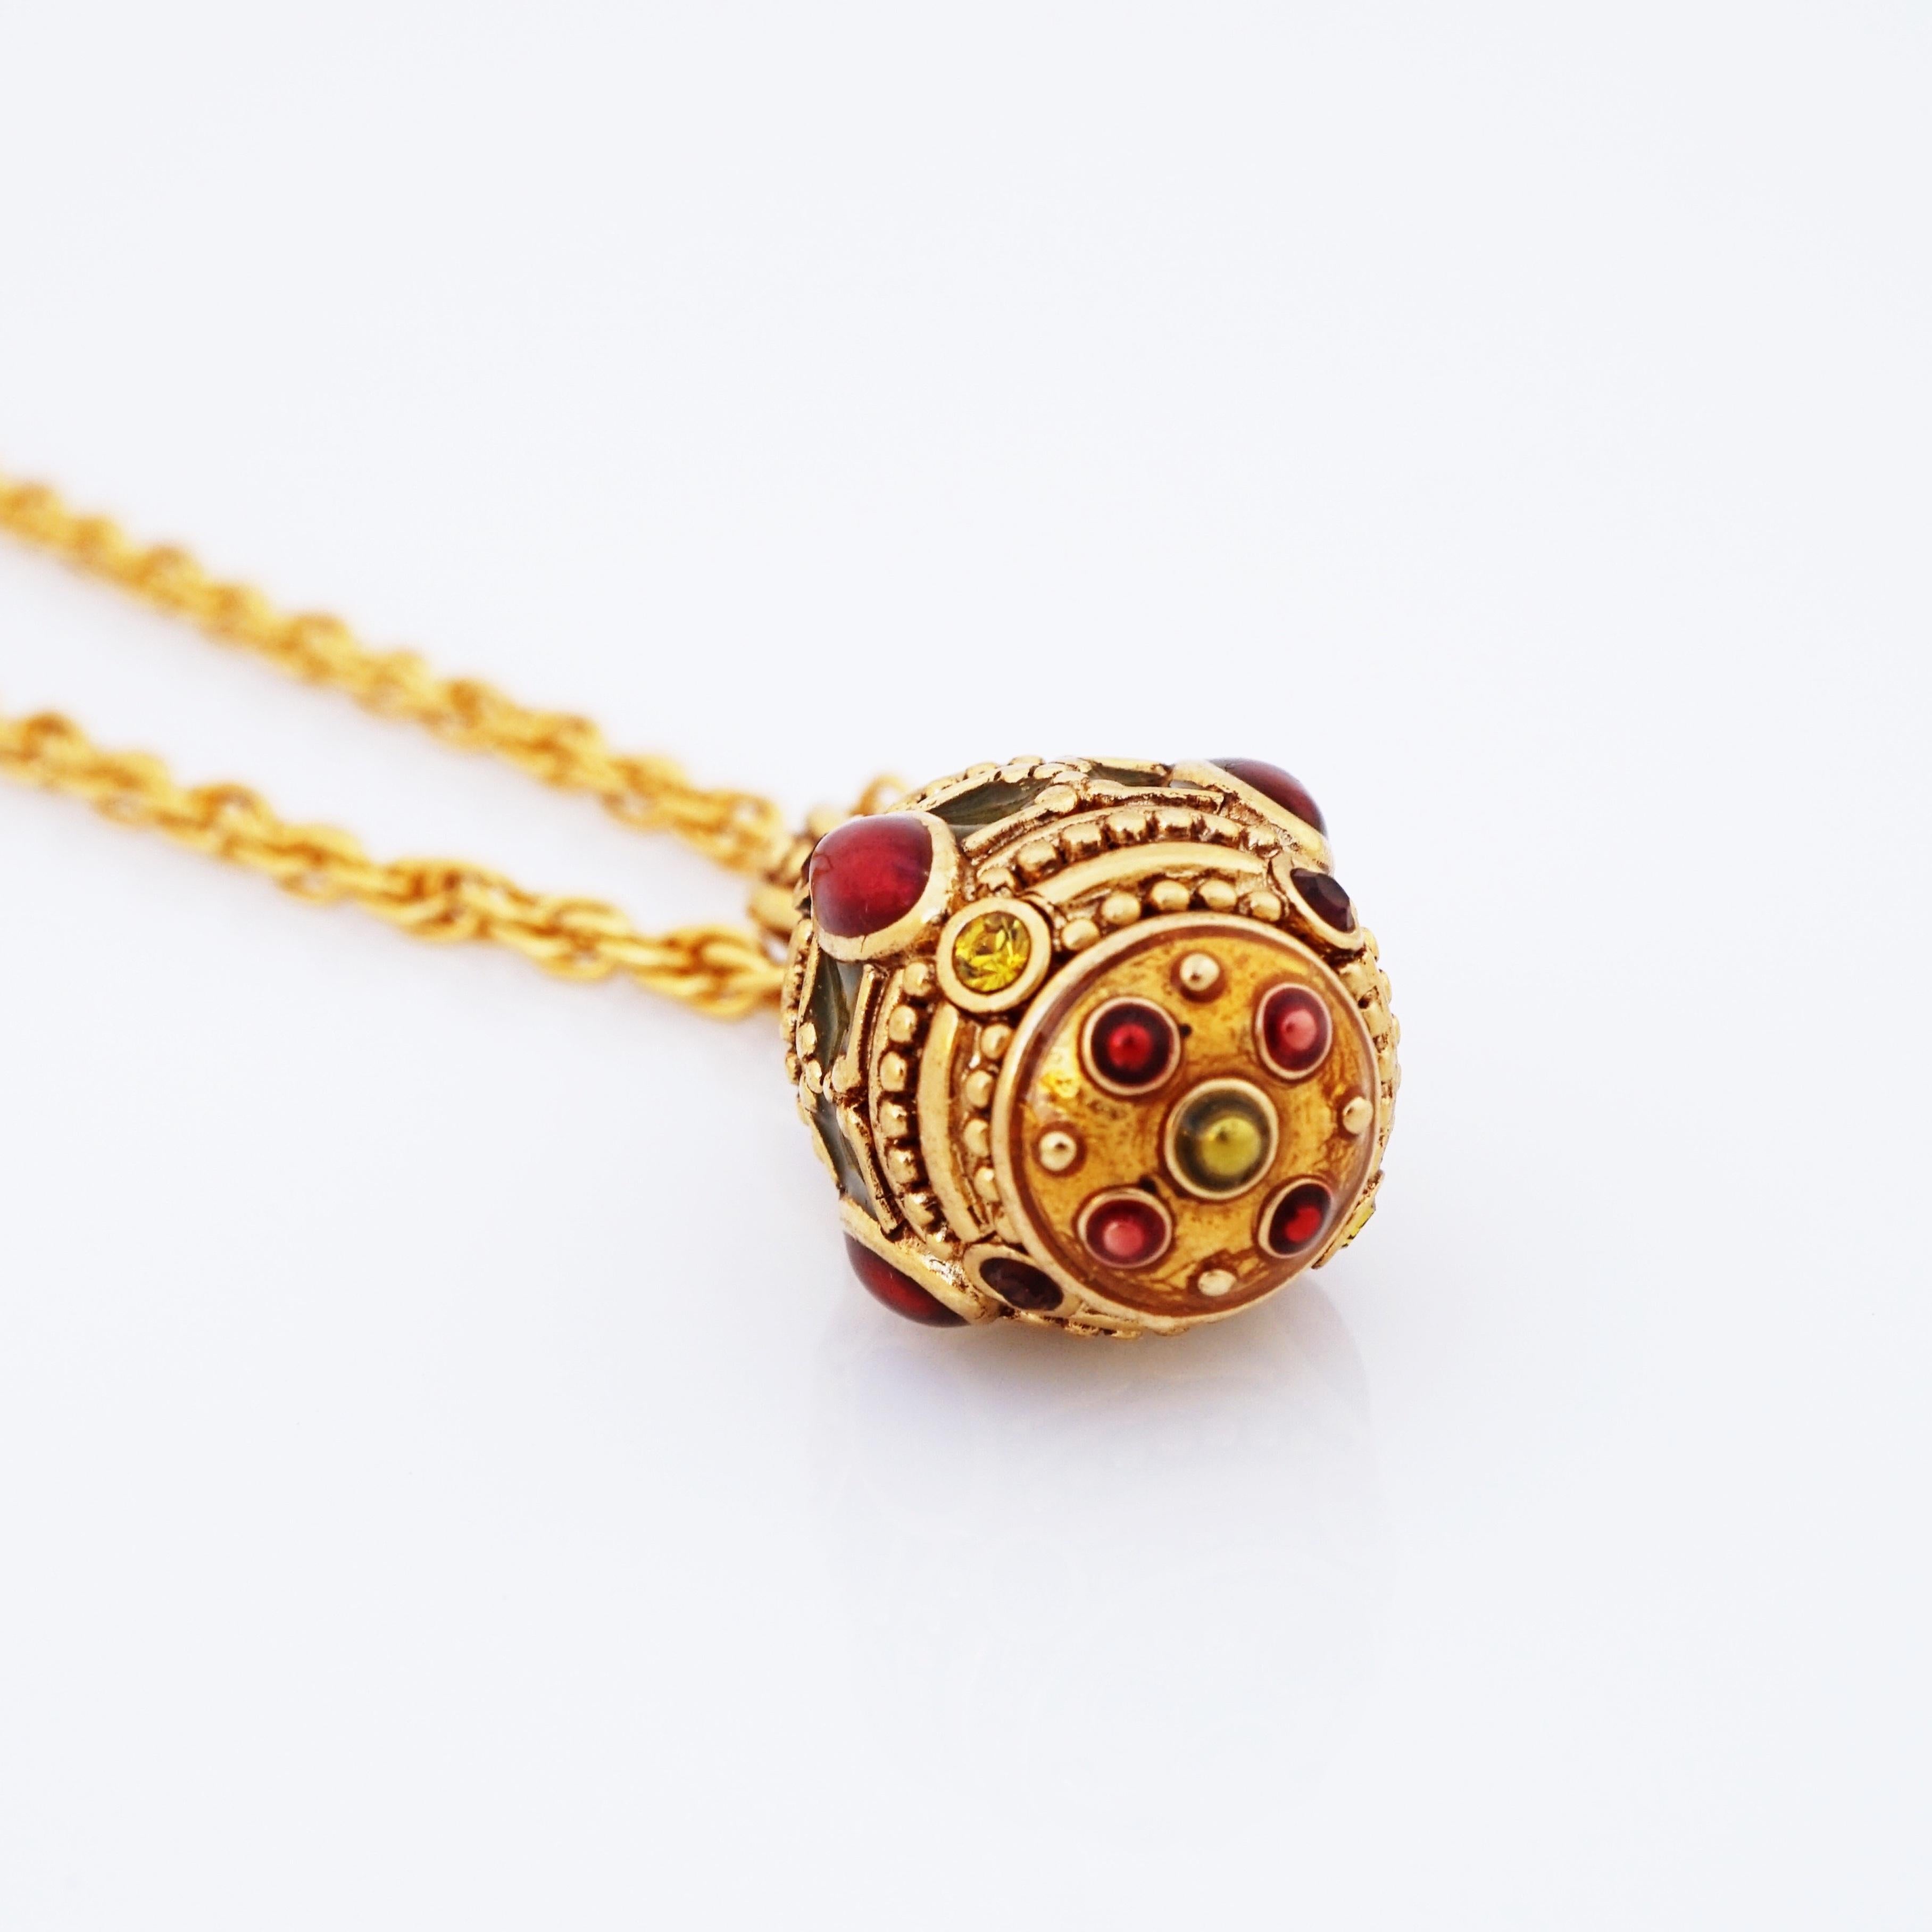 Modern Etruscan Style Gold & Enamel Faberge Egg Pendant Necklace By Joan Rivers, 1990s